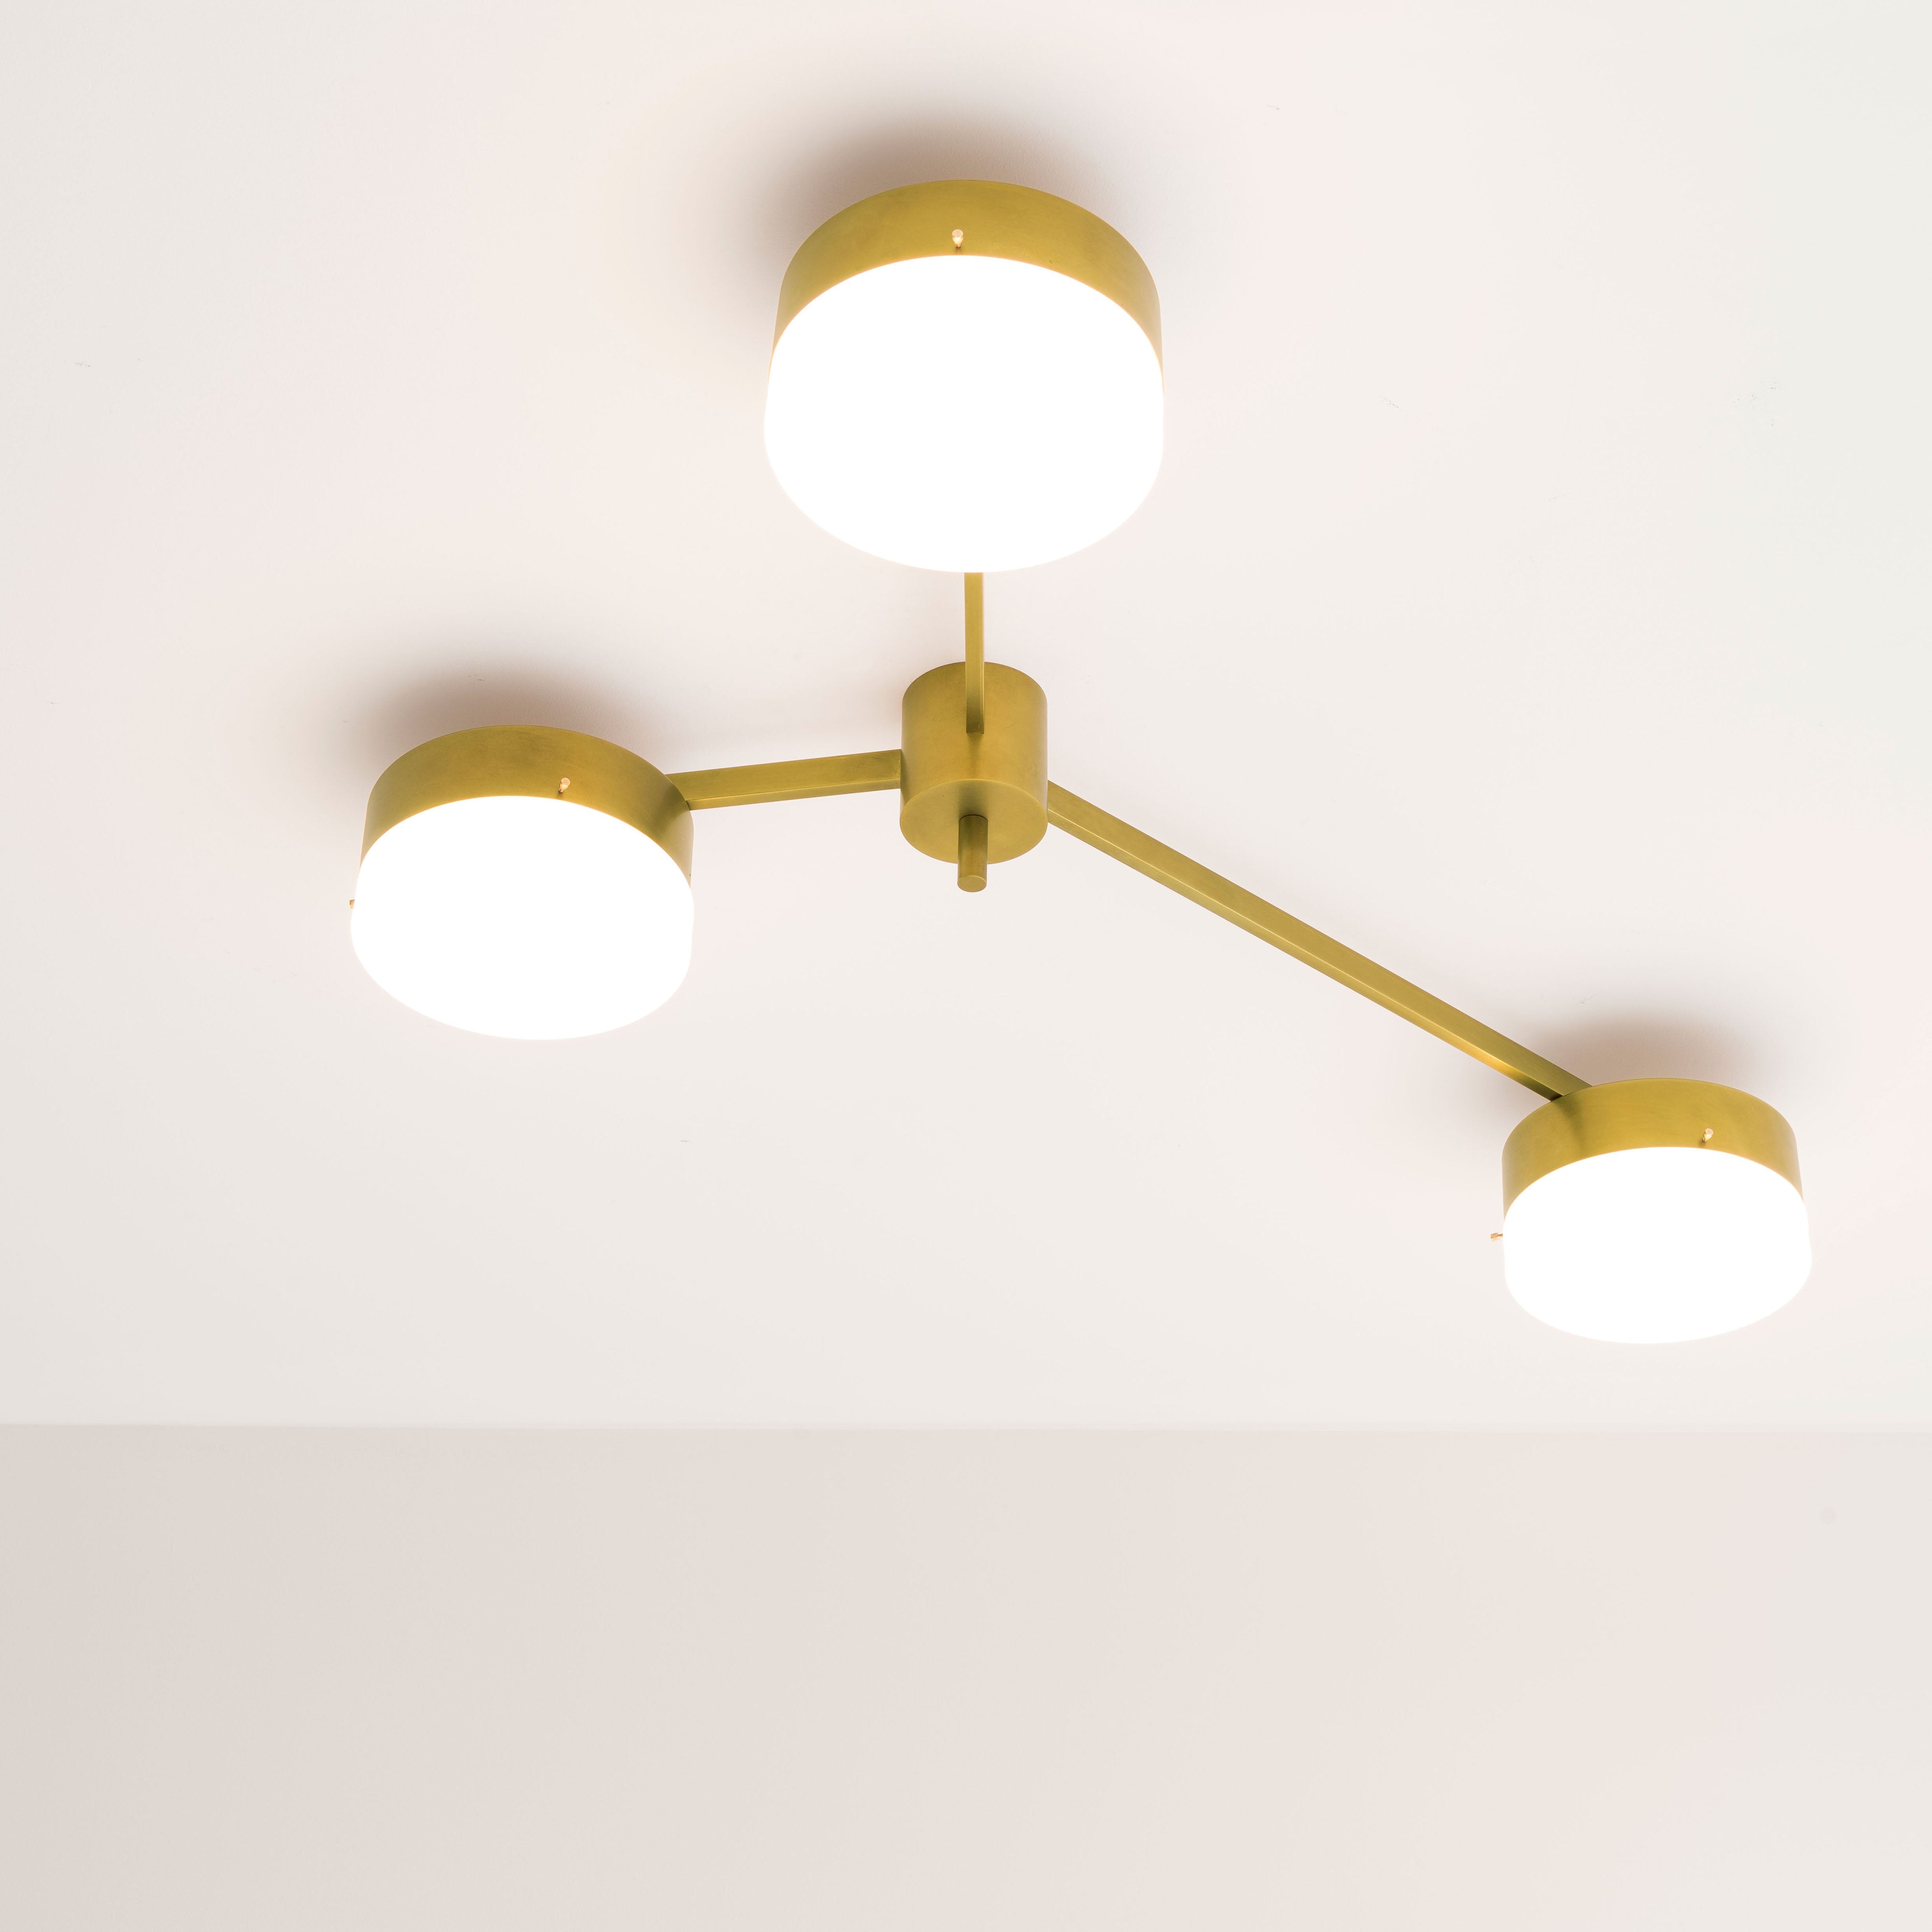 Syzygy can be mounted both as a hanging and a wall lamp.